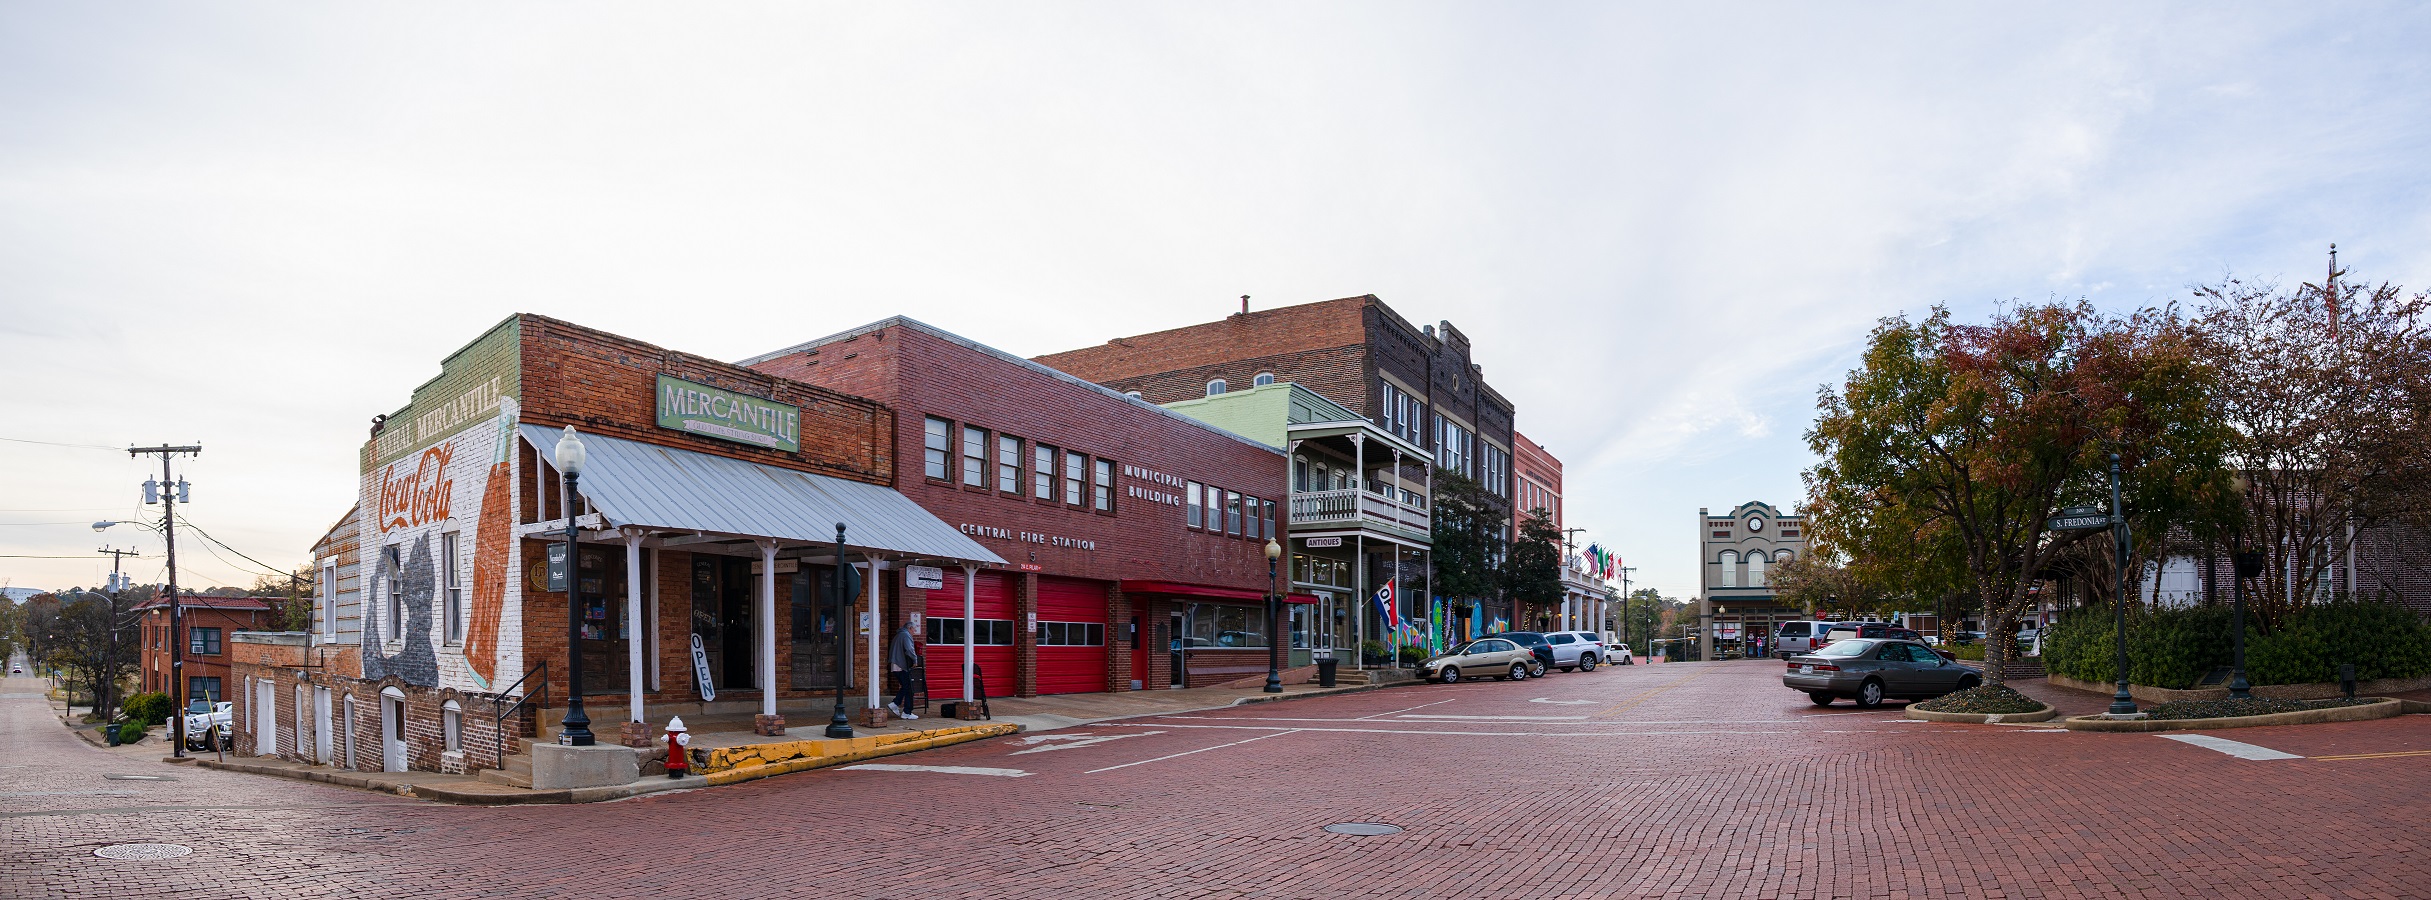 Historic brick paved street and buildings